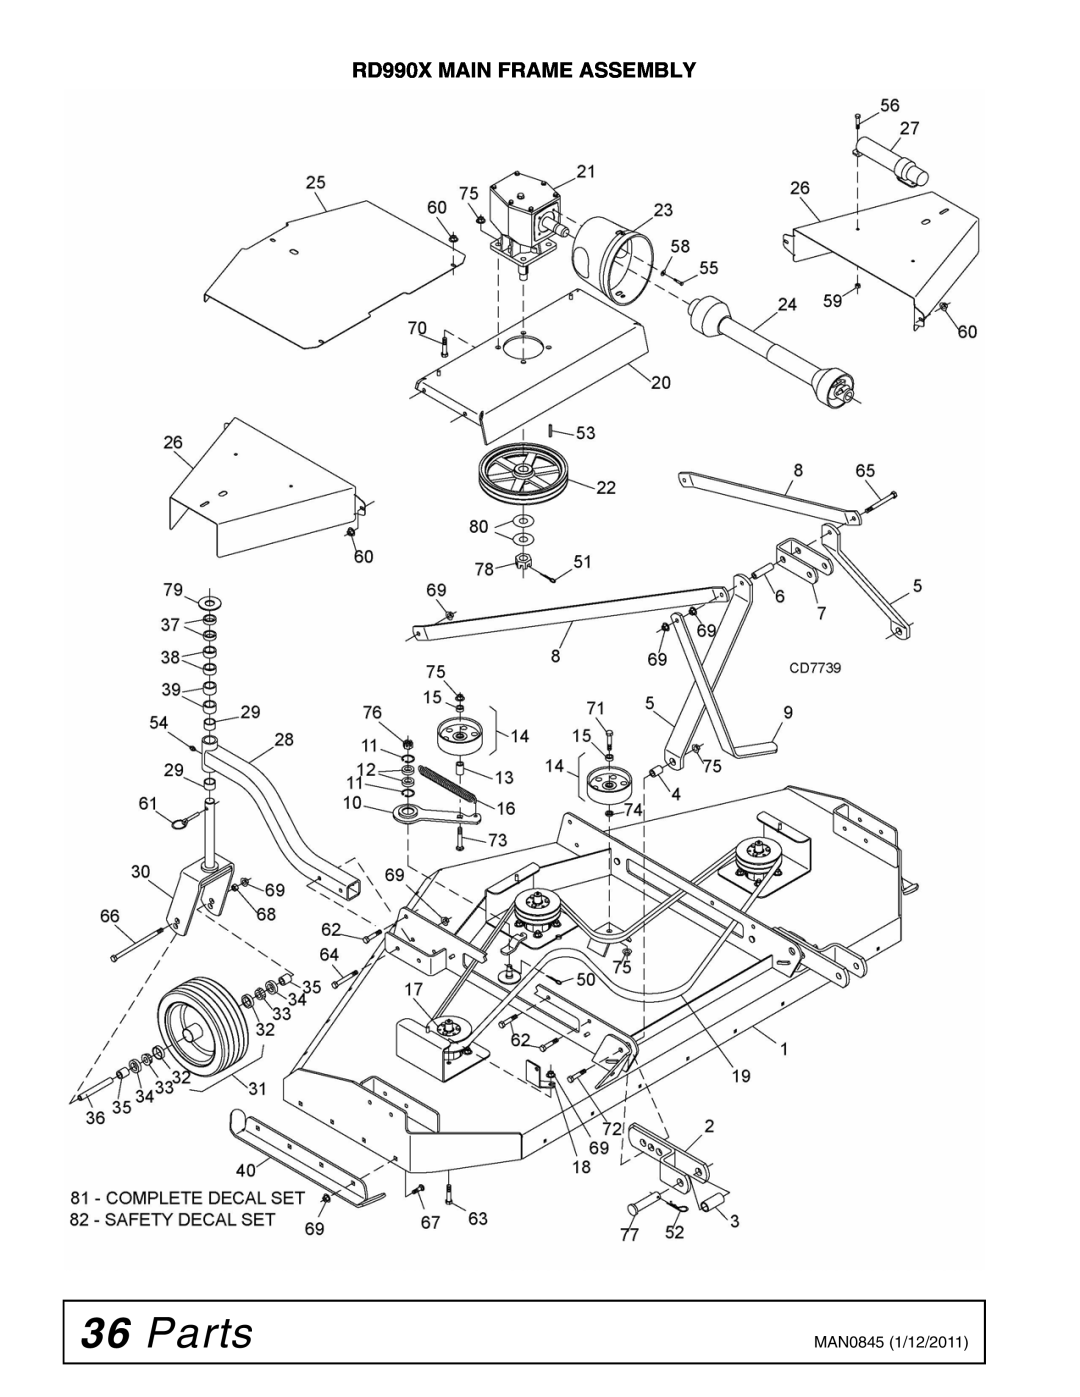 Woods Equipment manual Parts, RD990X MAIN FRAME ASSEMBLY 